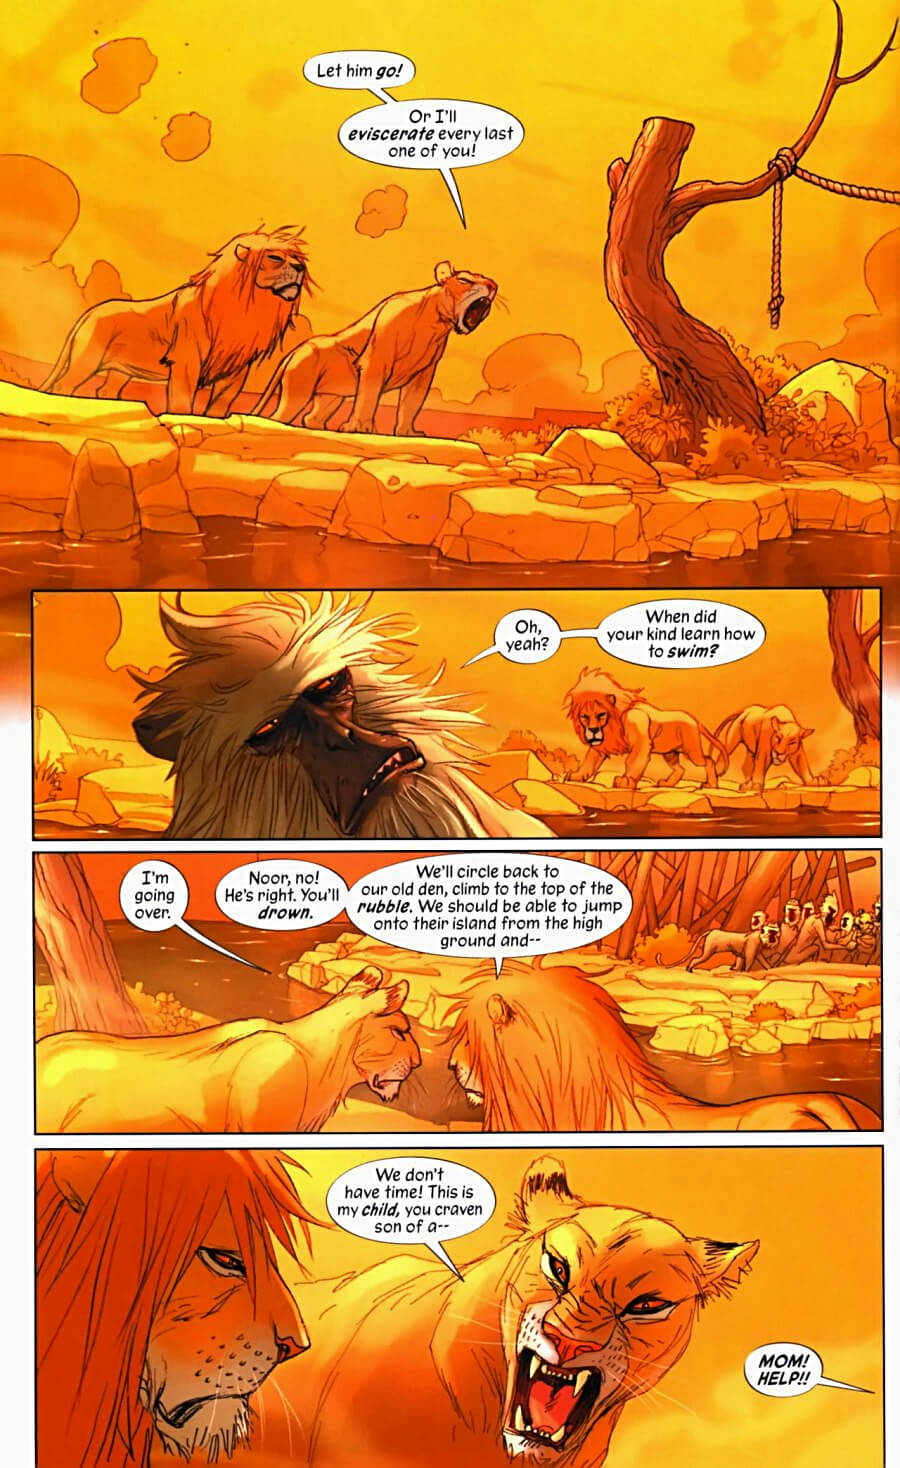 page 33 of pride of baghdad graphic novel